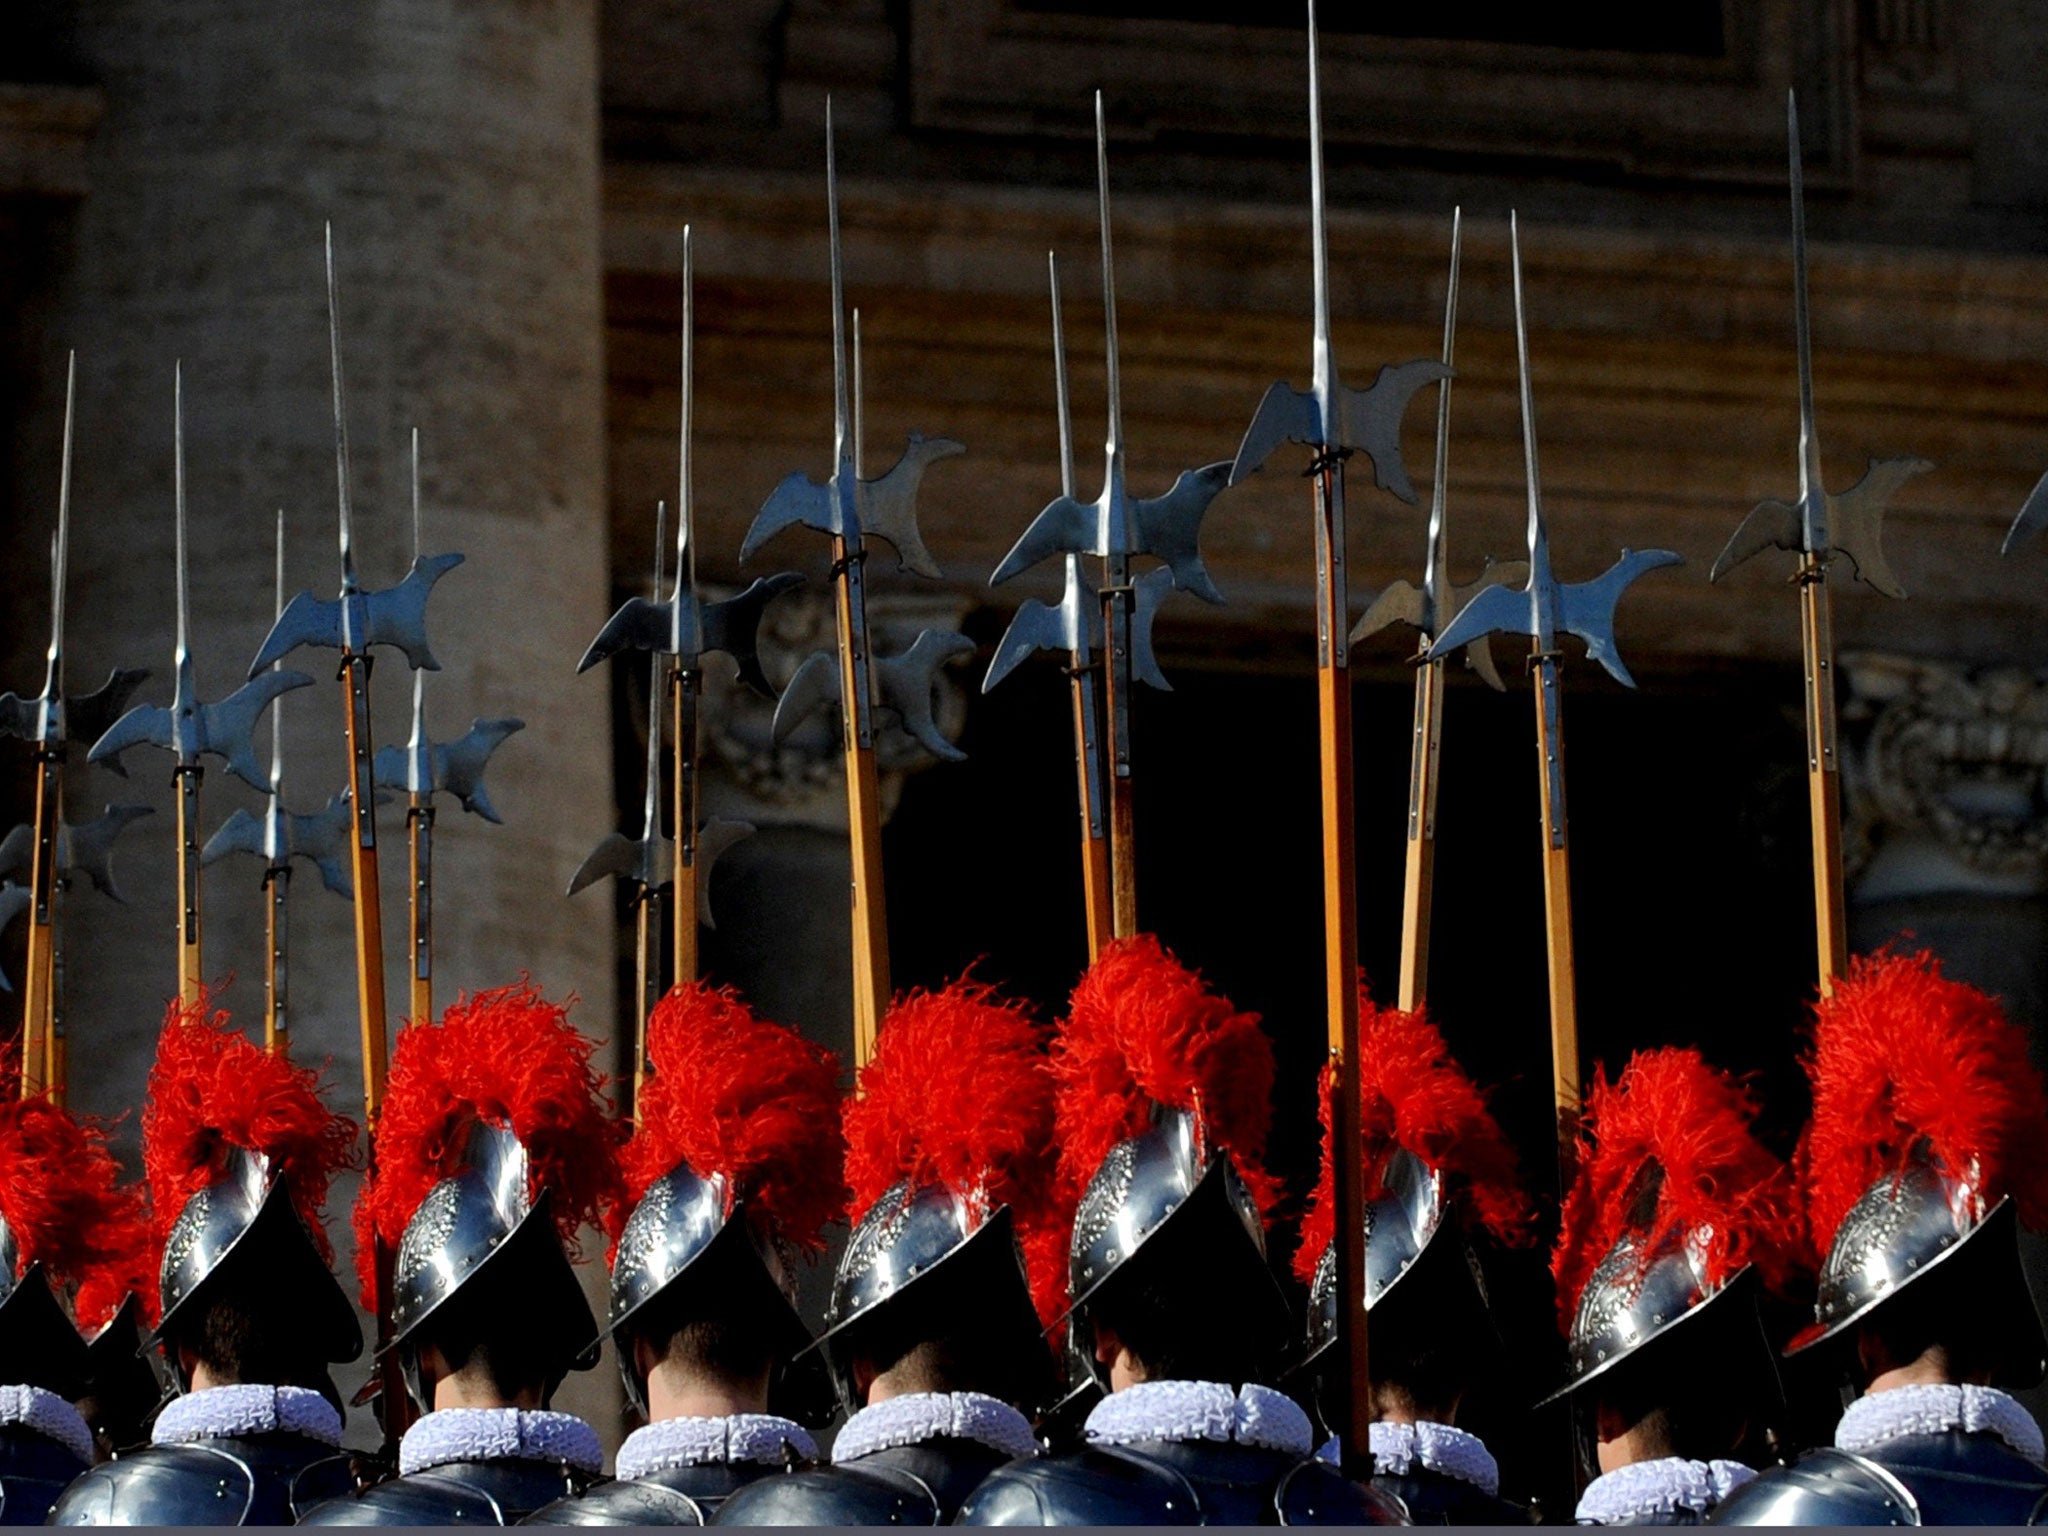 Swiss guards have protected the Papal Palace since the 15th century. Now a crack corp including KPMG has been charged with 'cutting through the complexity' of a corrupt Roman Curia